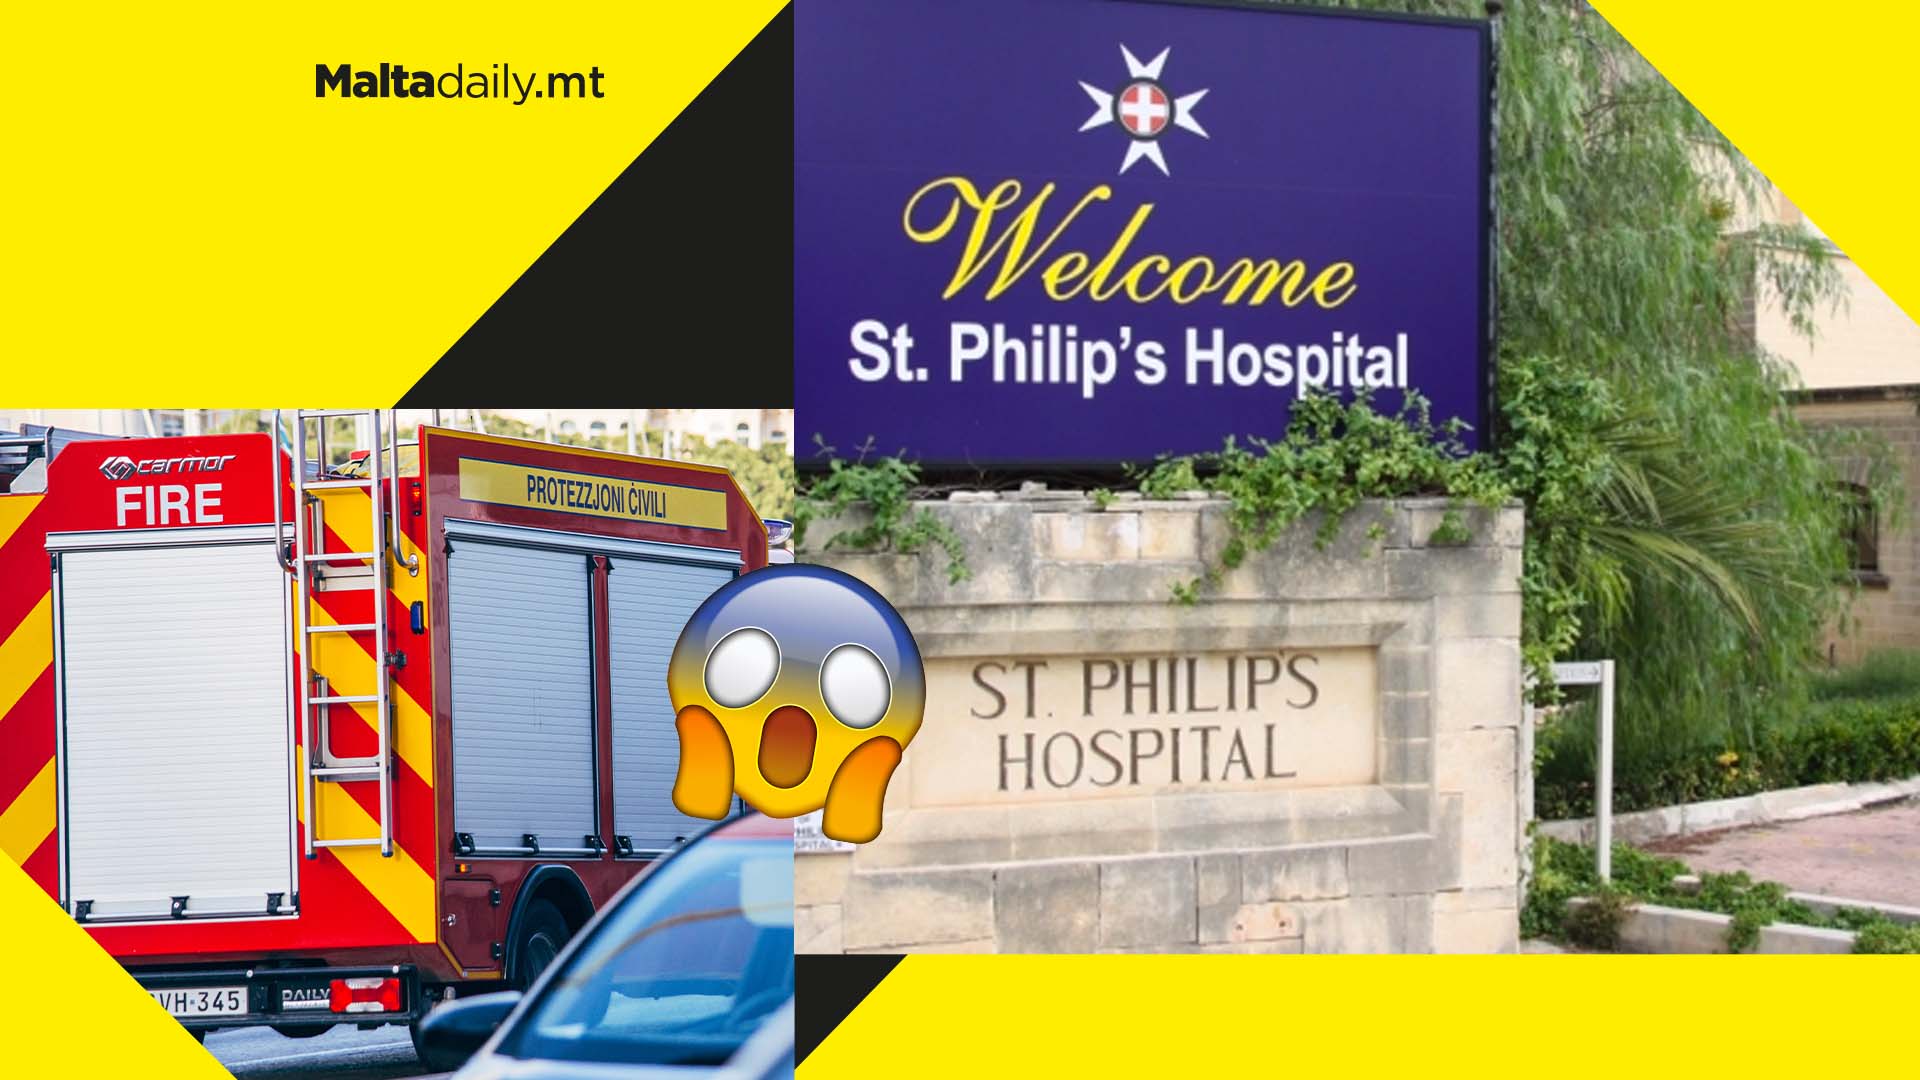 Nine youth arrested for starting fires in abandoned St Philip’s Hospital